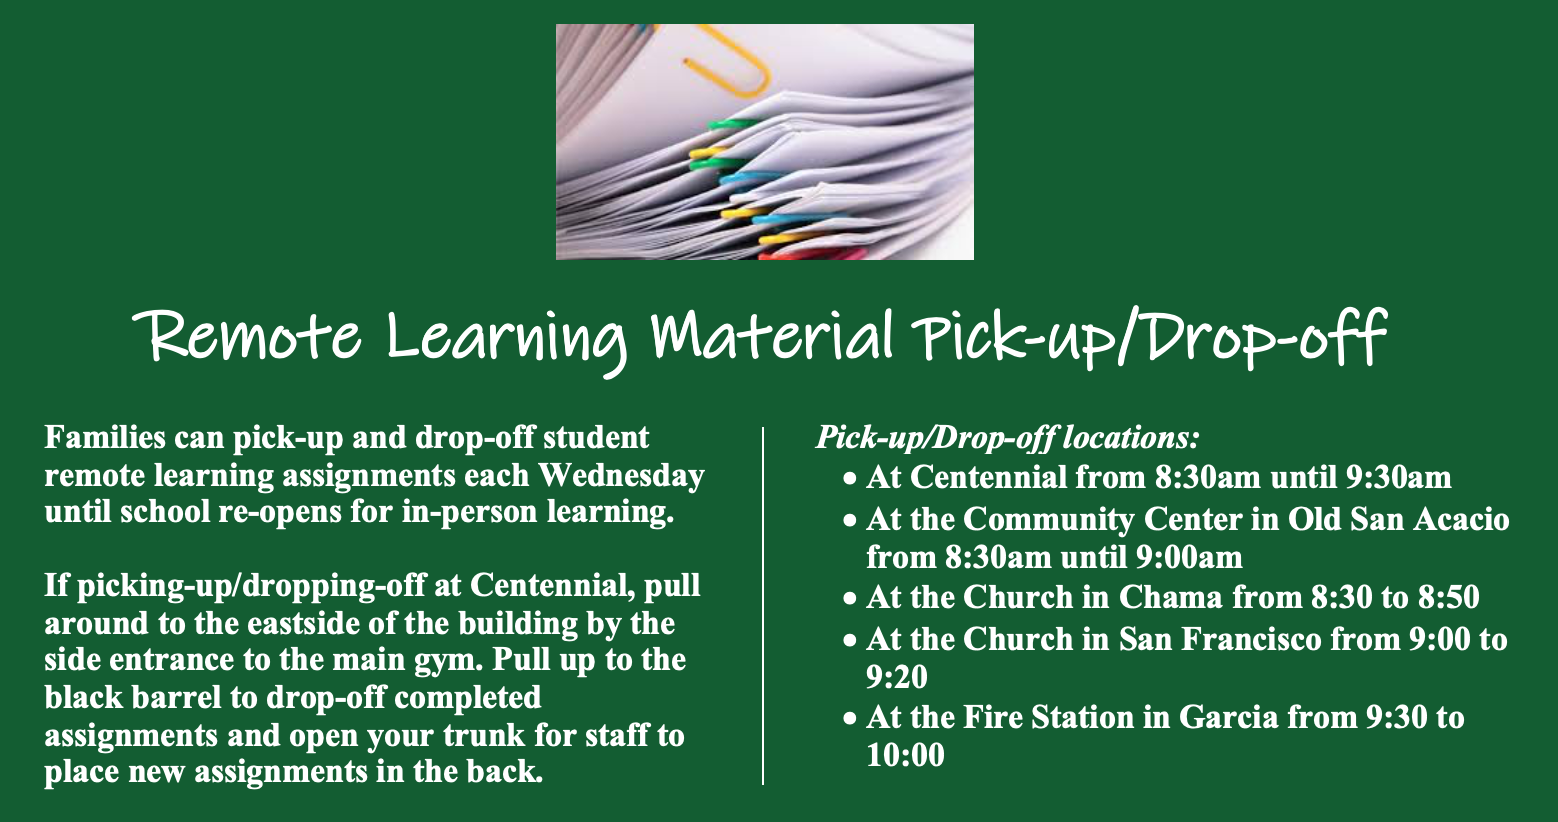 Remote learning material pick-up/drop off